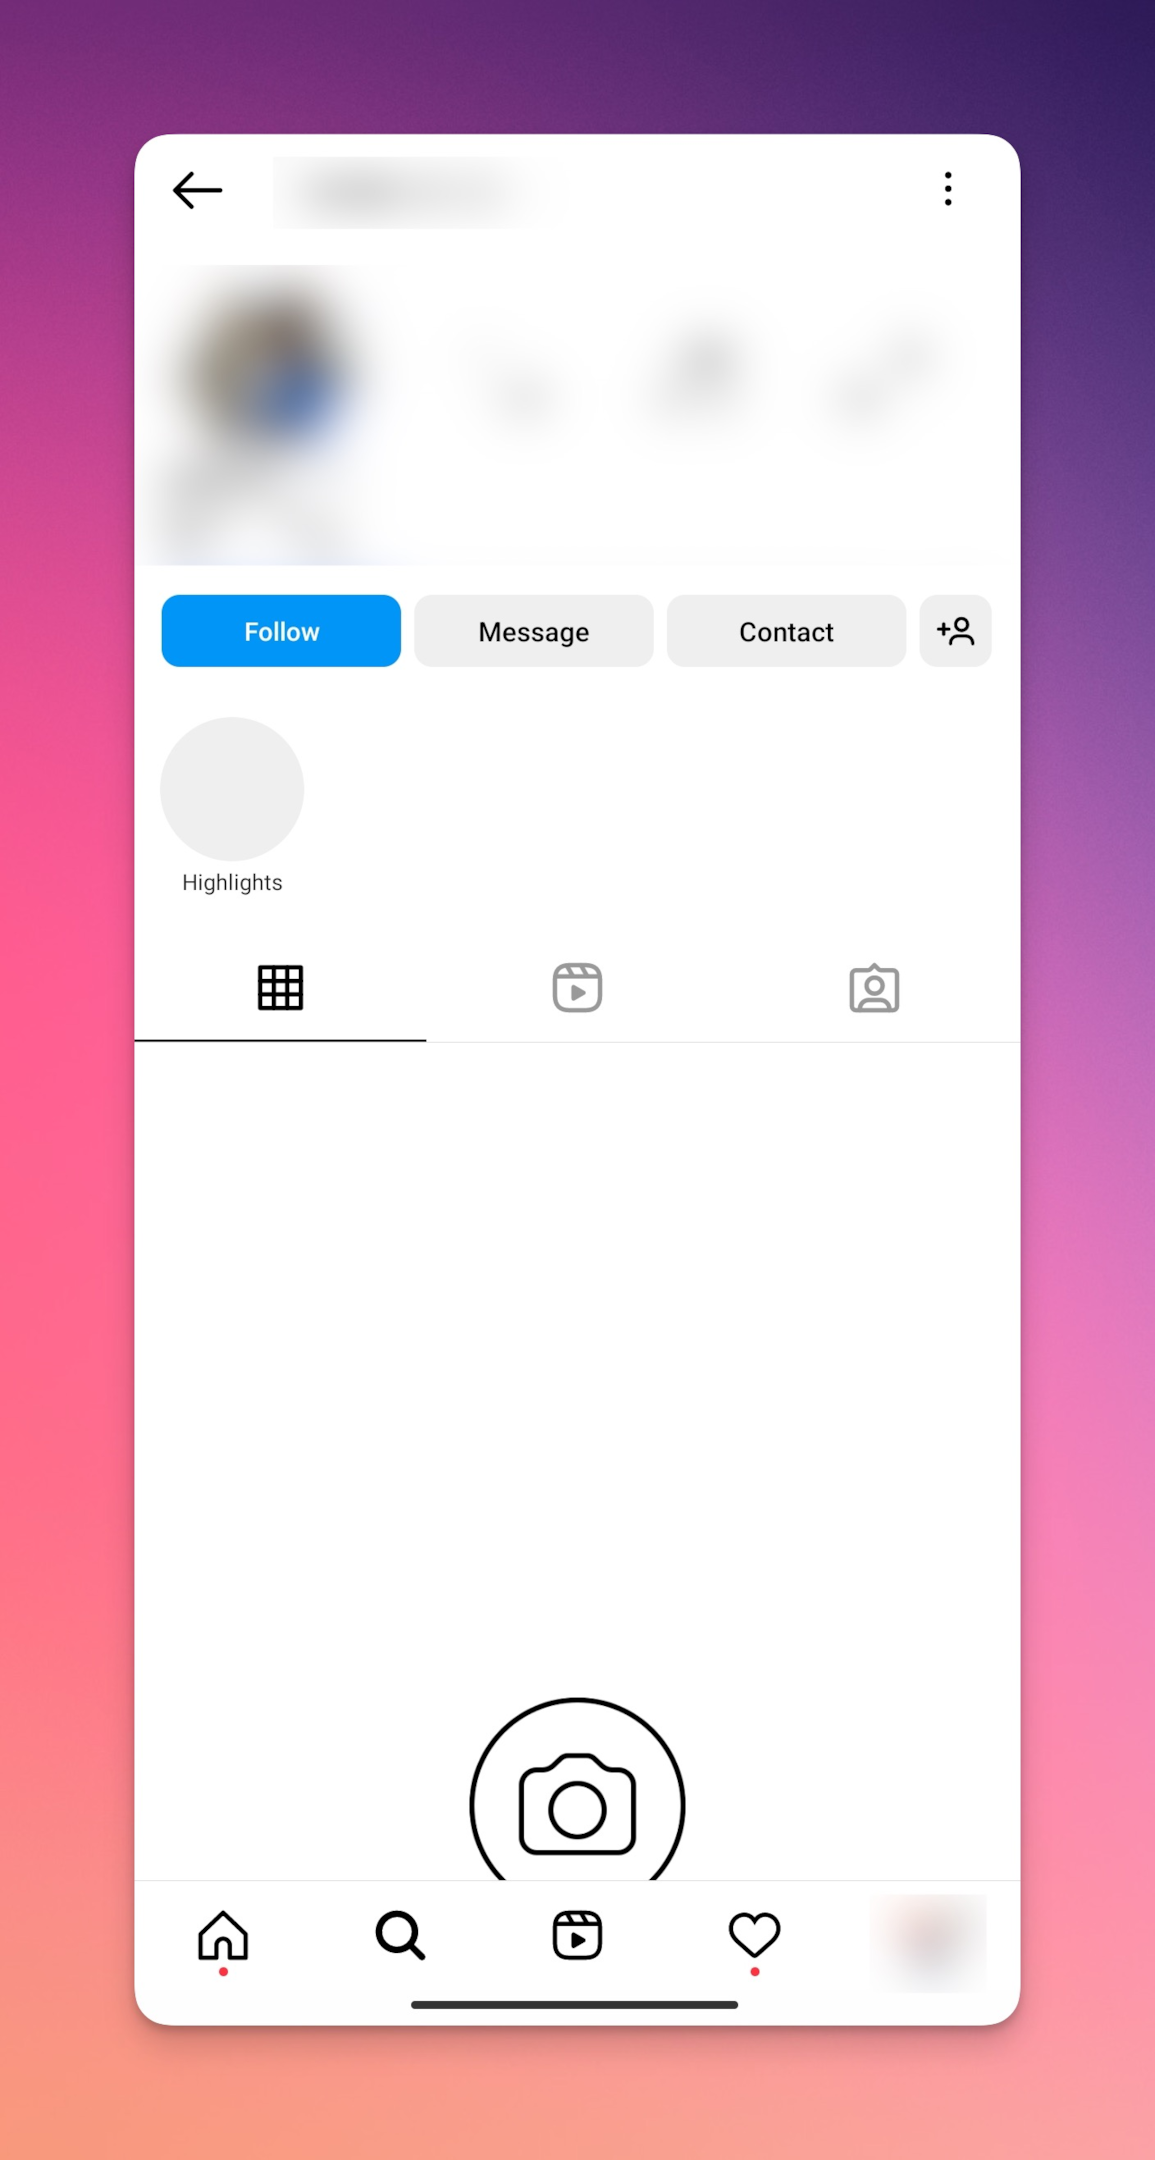 Remote.tools shows a screenshot of an Instagram profile that has blocked your account